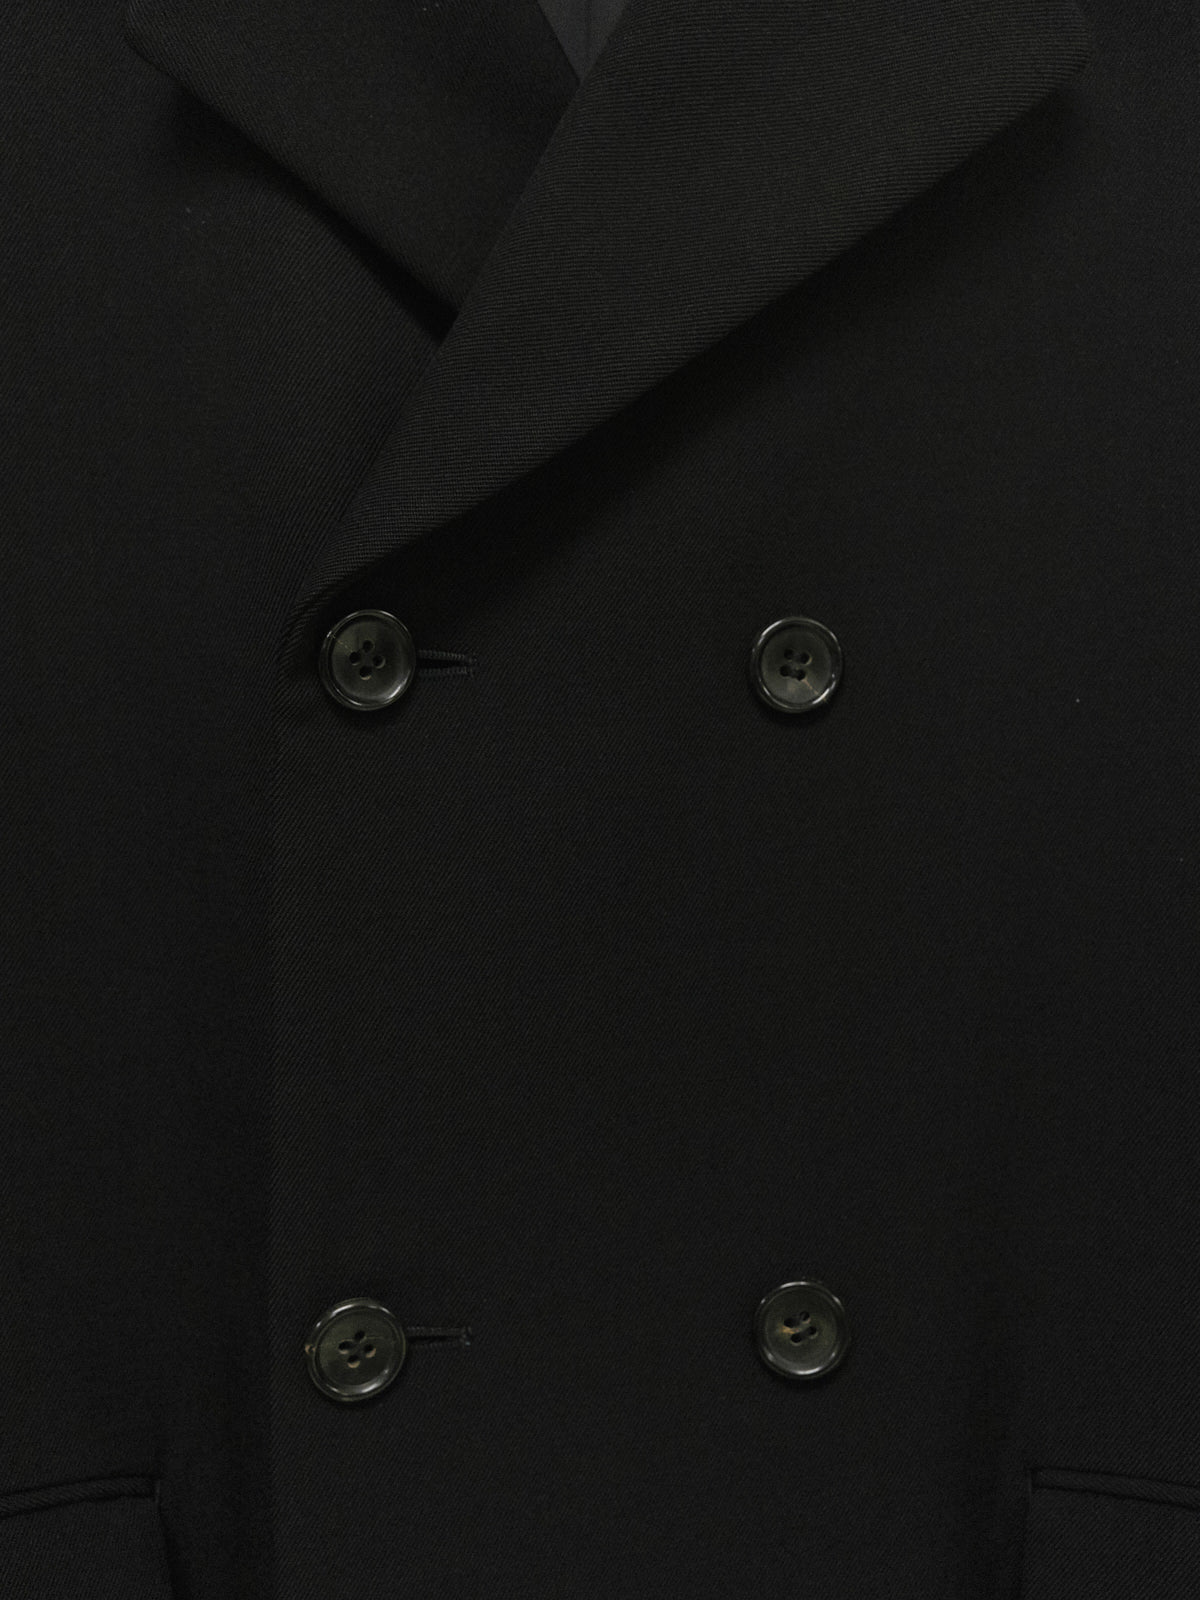 tricot comme des garcons black wool gabardine boxy double breasted pea coat - 1990s